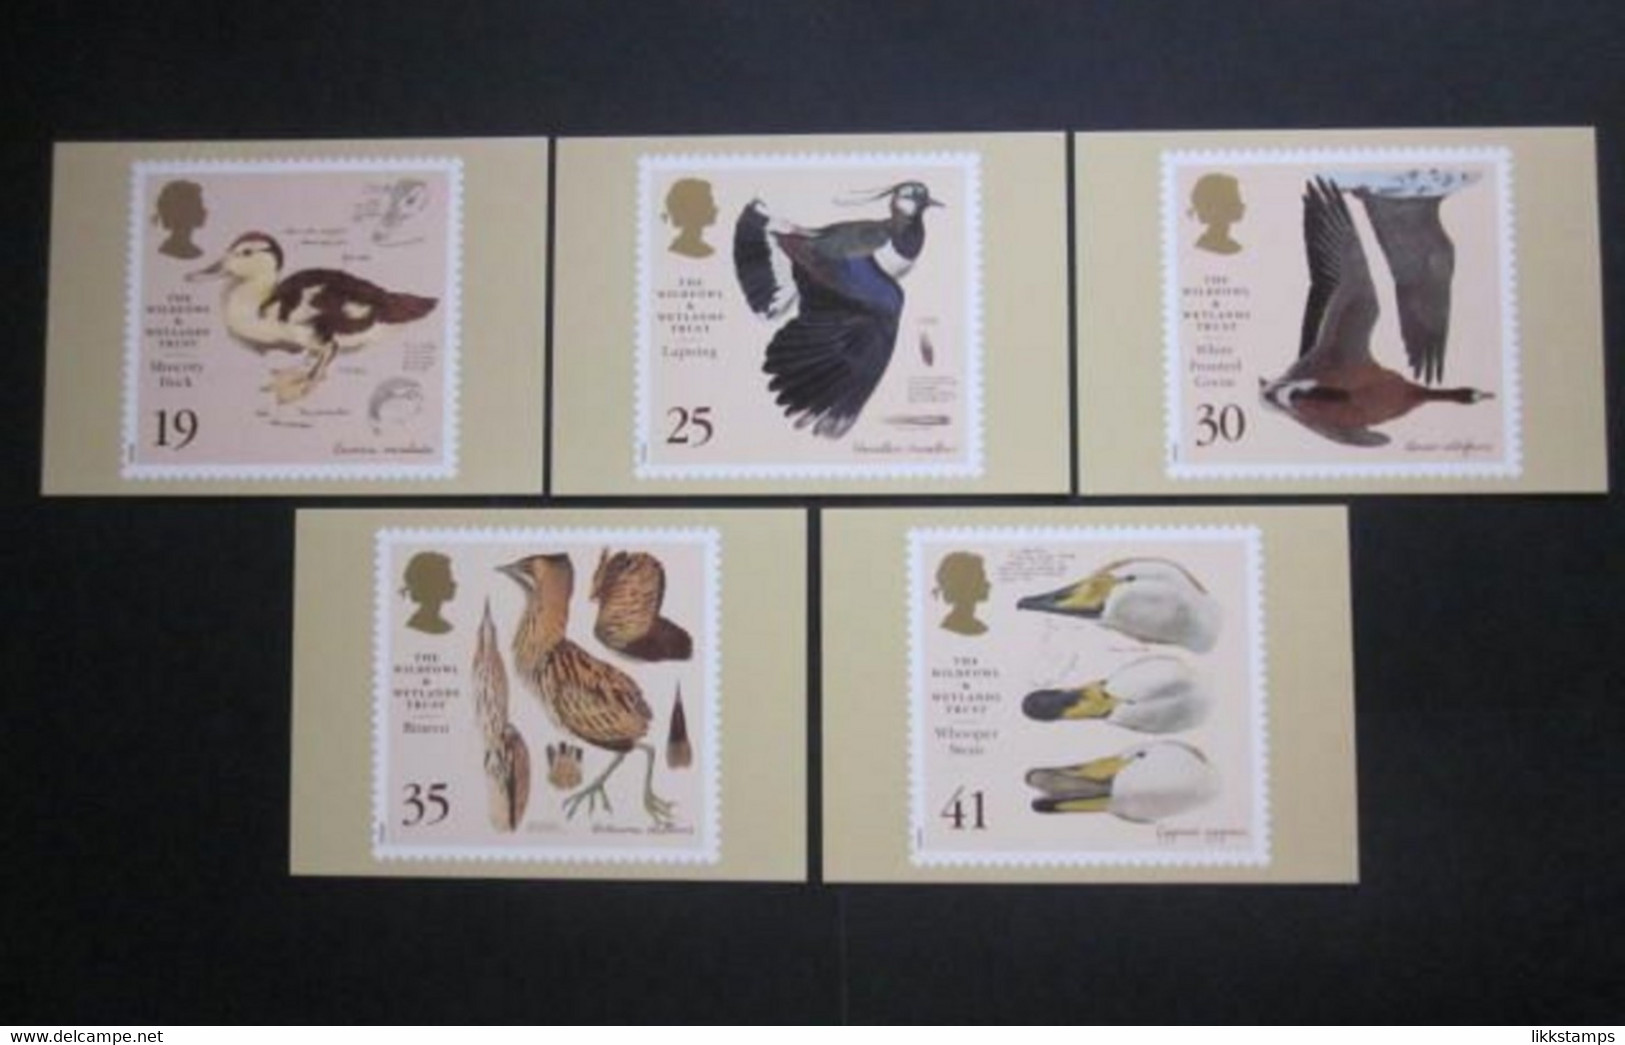 1996 THE 50th ANNIVERSARY OF THE WILDFOWL AND WETLANDS TRUST P.H.Q. CARDS UNUSED, ISSUE No. 177 (B) #01098 - PHQ Karten